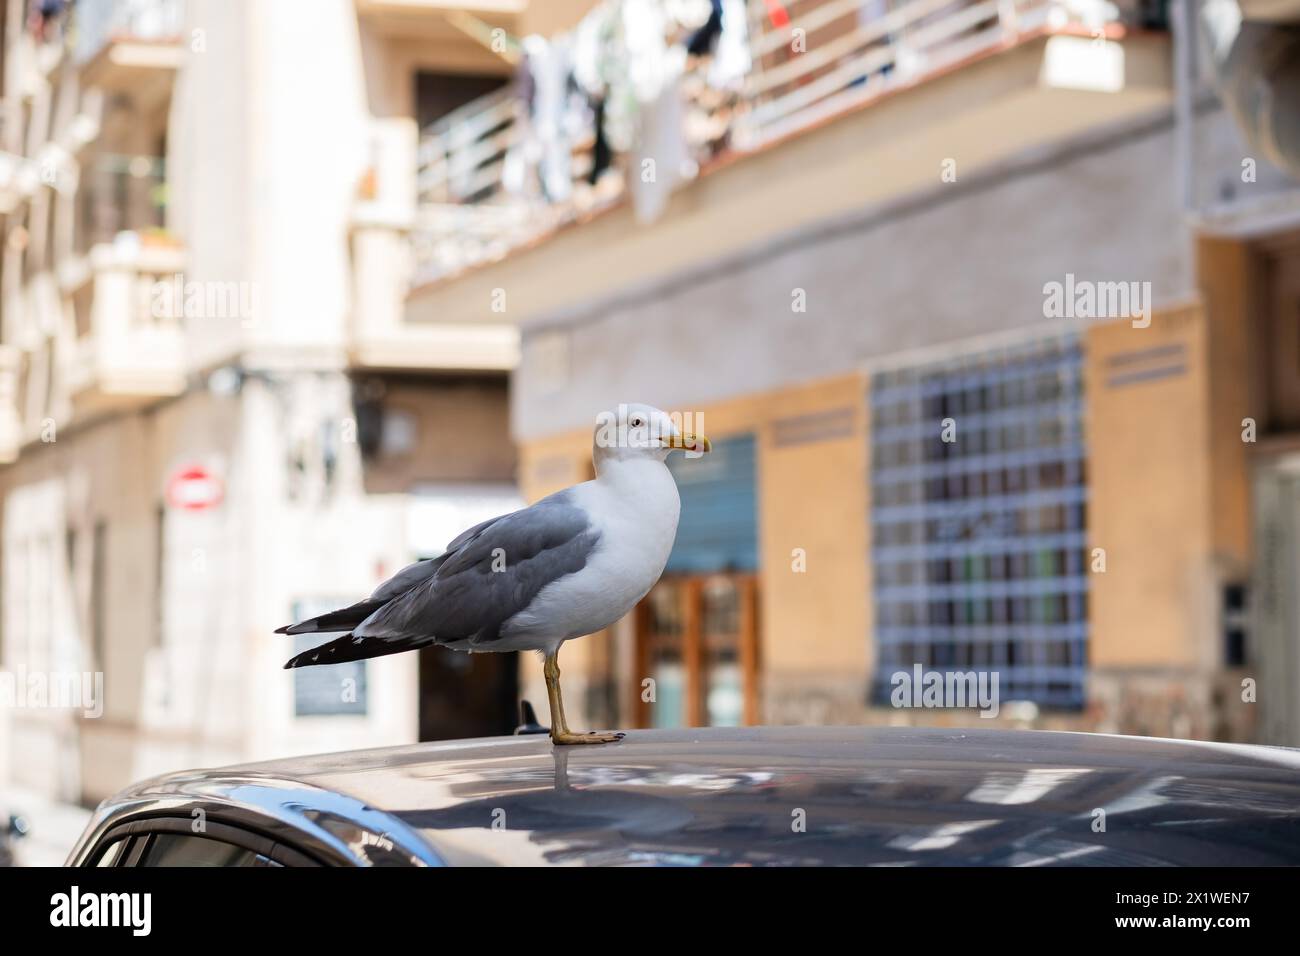 Seagull on a car roof in Barcelona, Spain Stock Photo